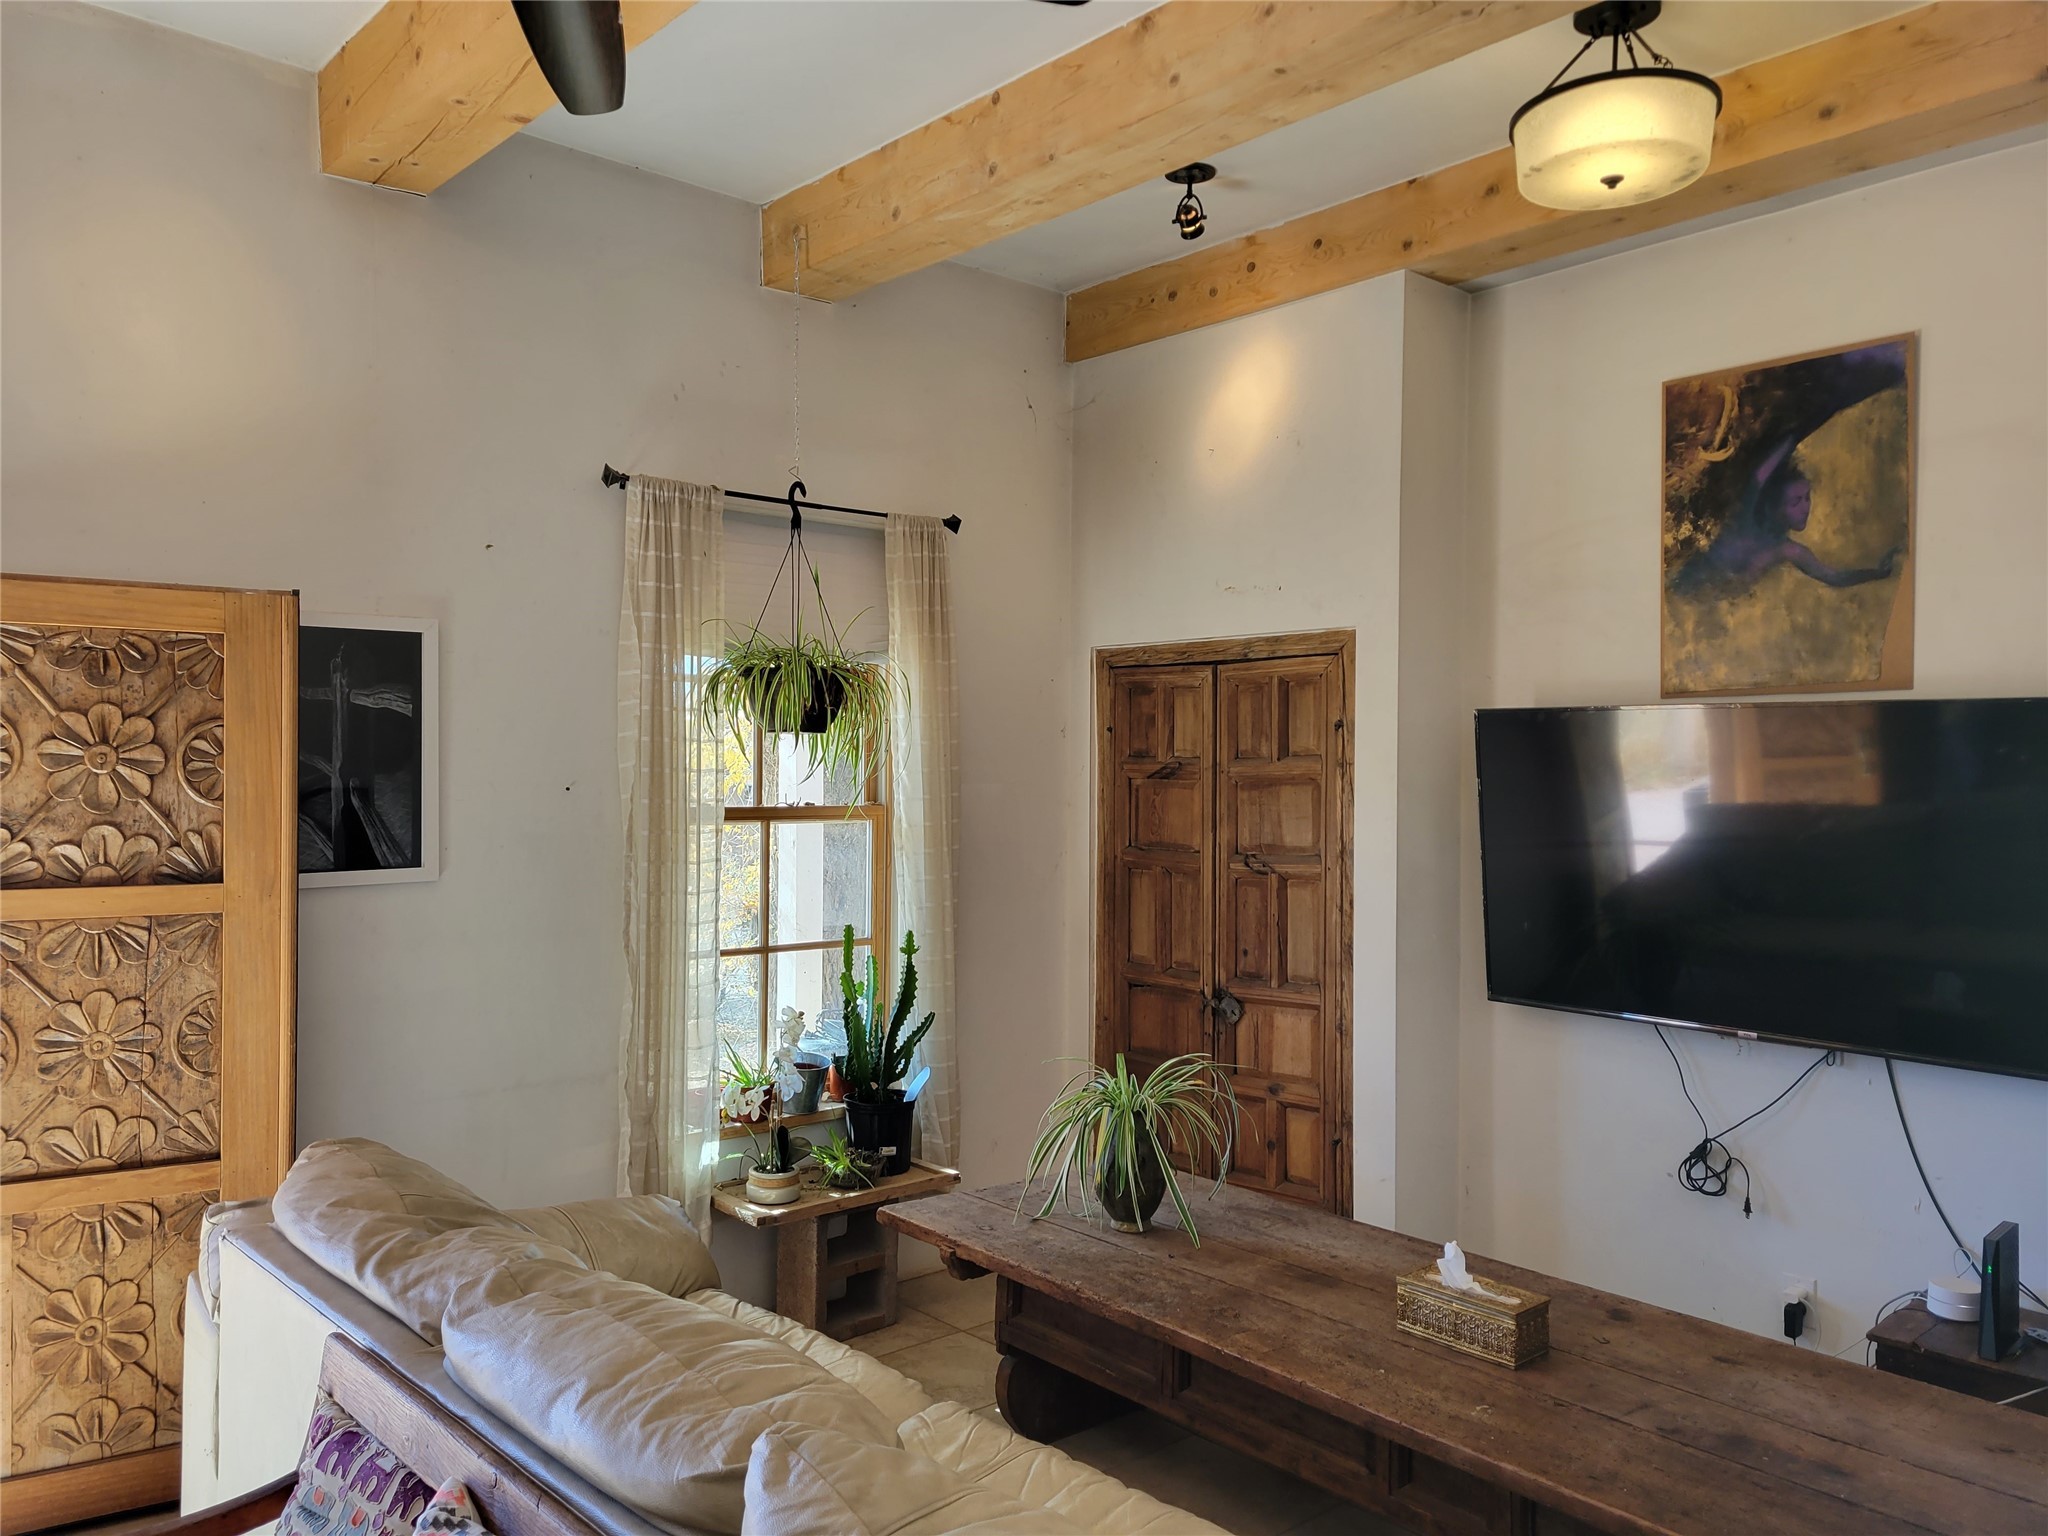 309 E Berger Street, Santa Fe, New Mexico 87505, 4 Bedrooms Bedrooms, ,2 BathroomsBathrooms,Residential,For Sale,309 E Berger Street,202401117